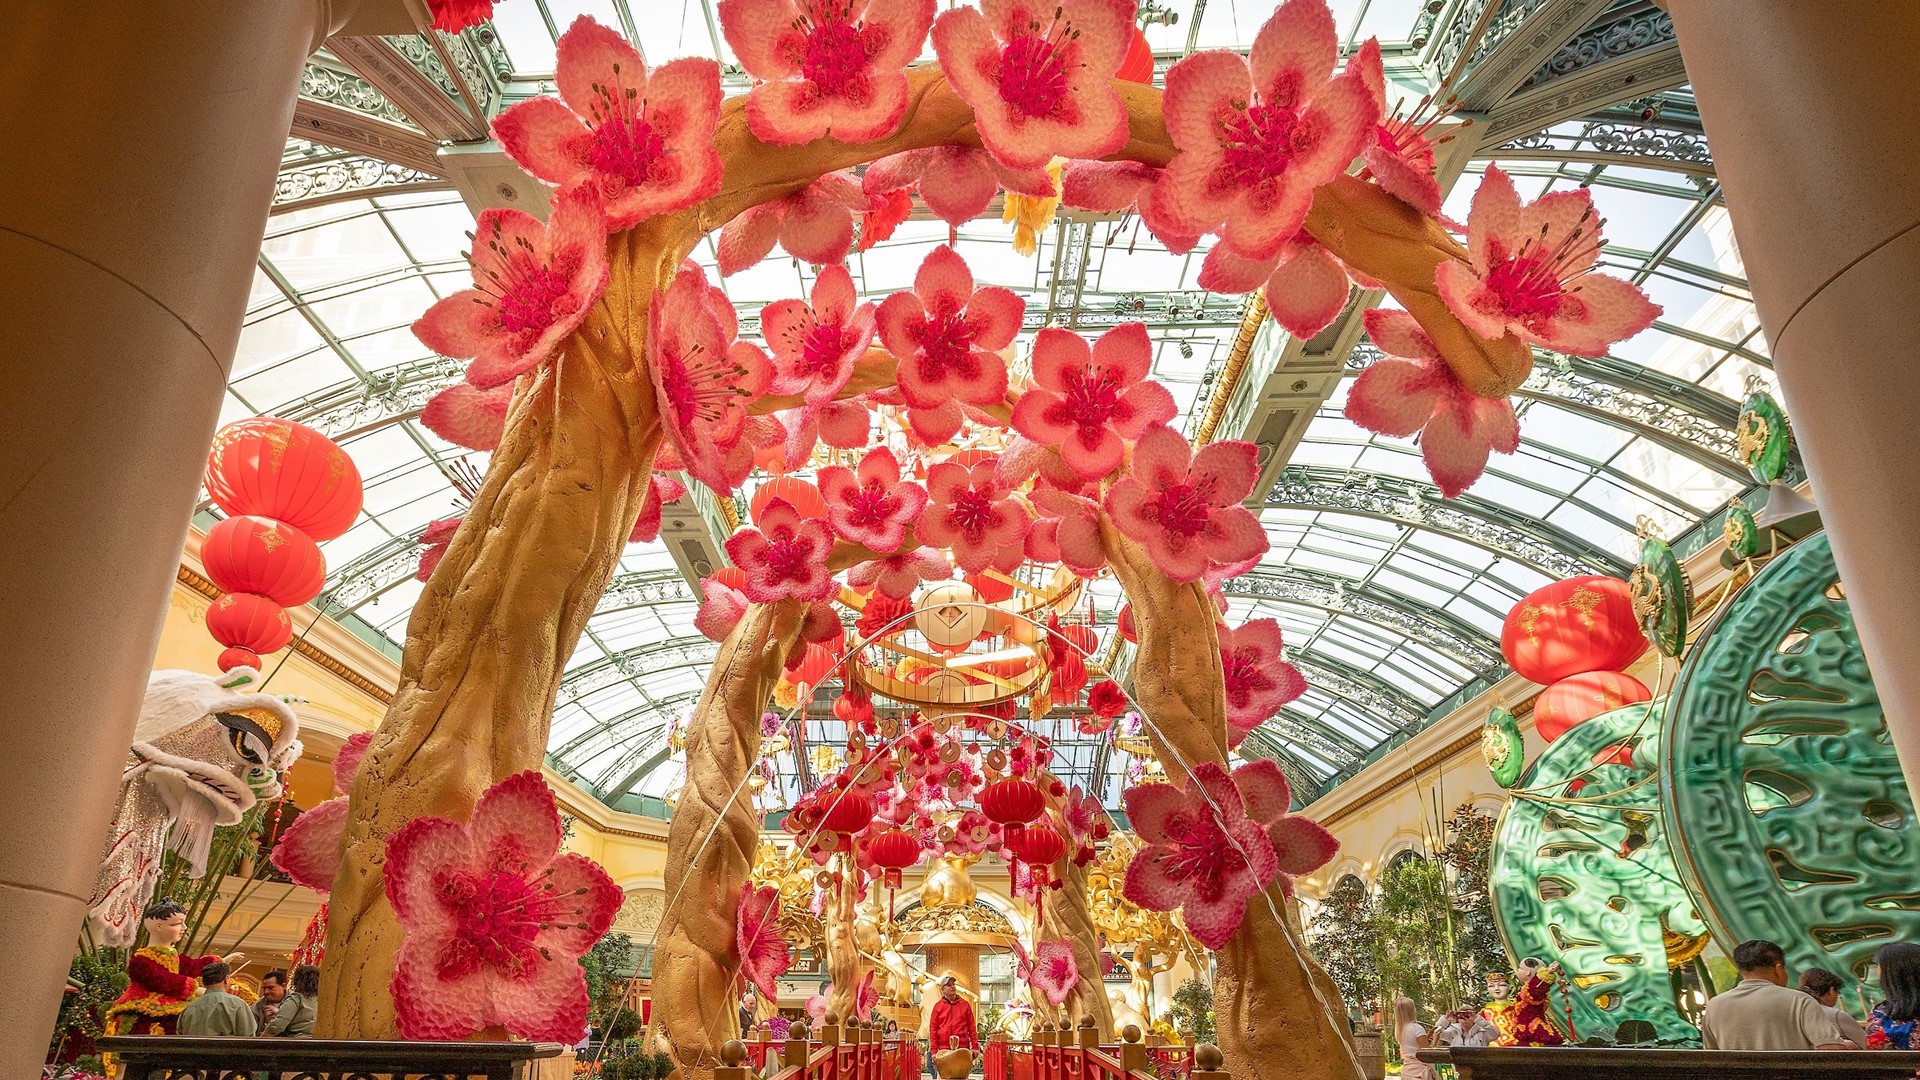 Visitors flock to the Bellagio Conservatory & Botanical Gardens